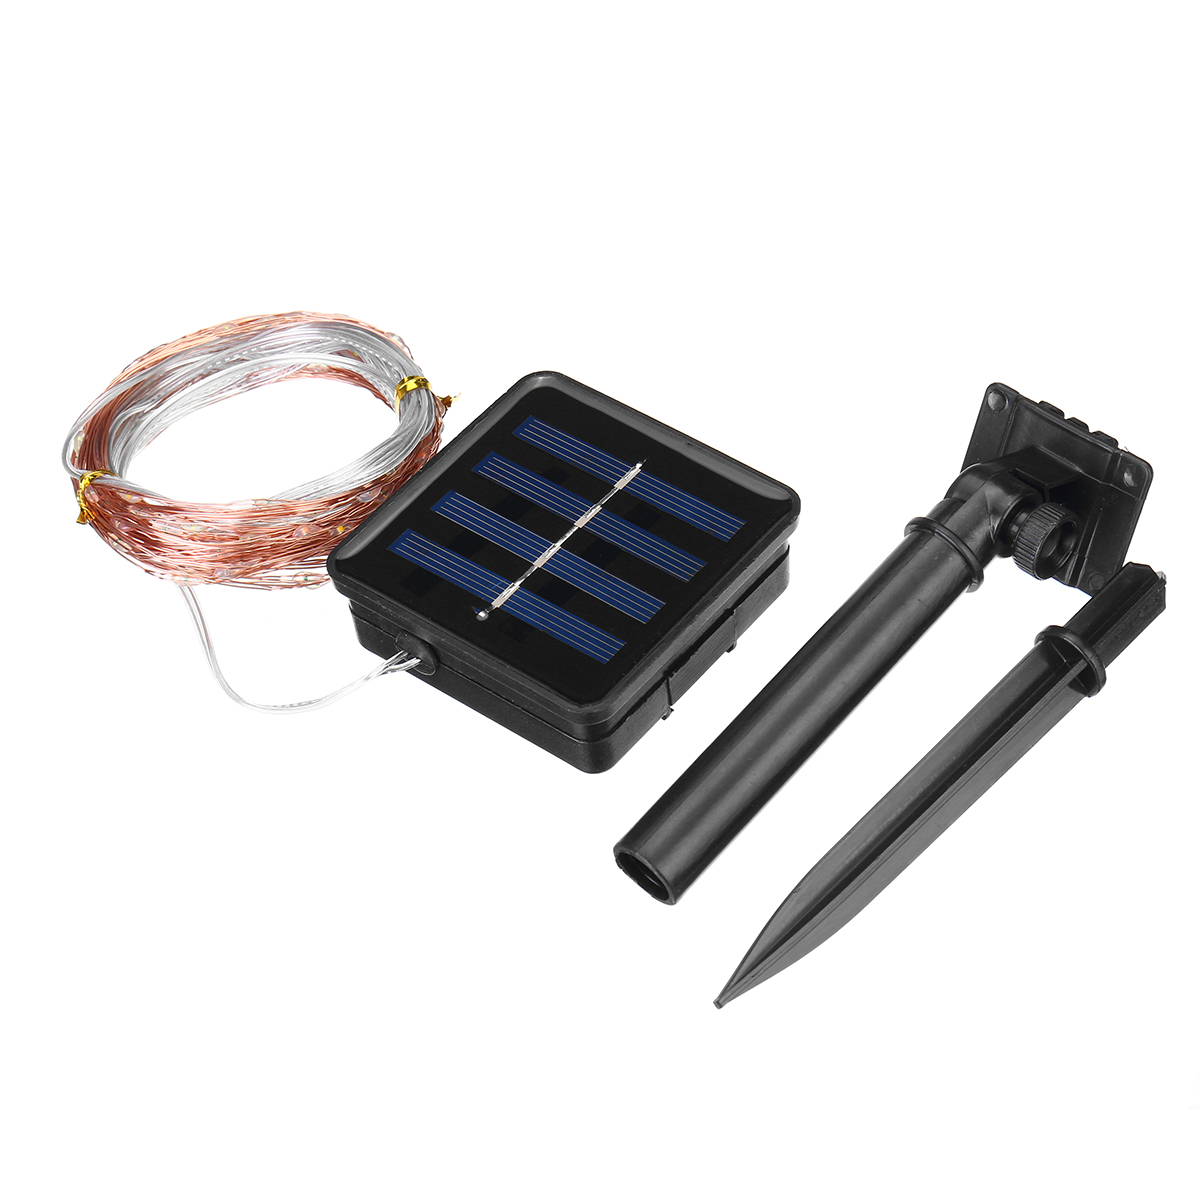 12M-22M-LED-Solar-Power-String-Light-8-Modes-Copper-Wire-Fairy-Outdoor-Garden-Waterproof-Holiday-Dec-1713762-2